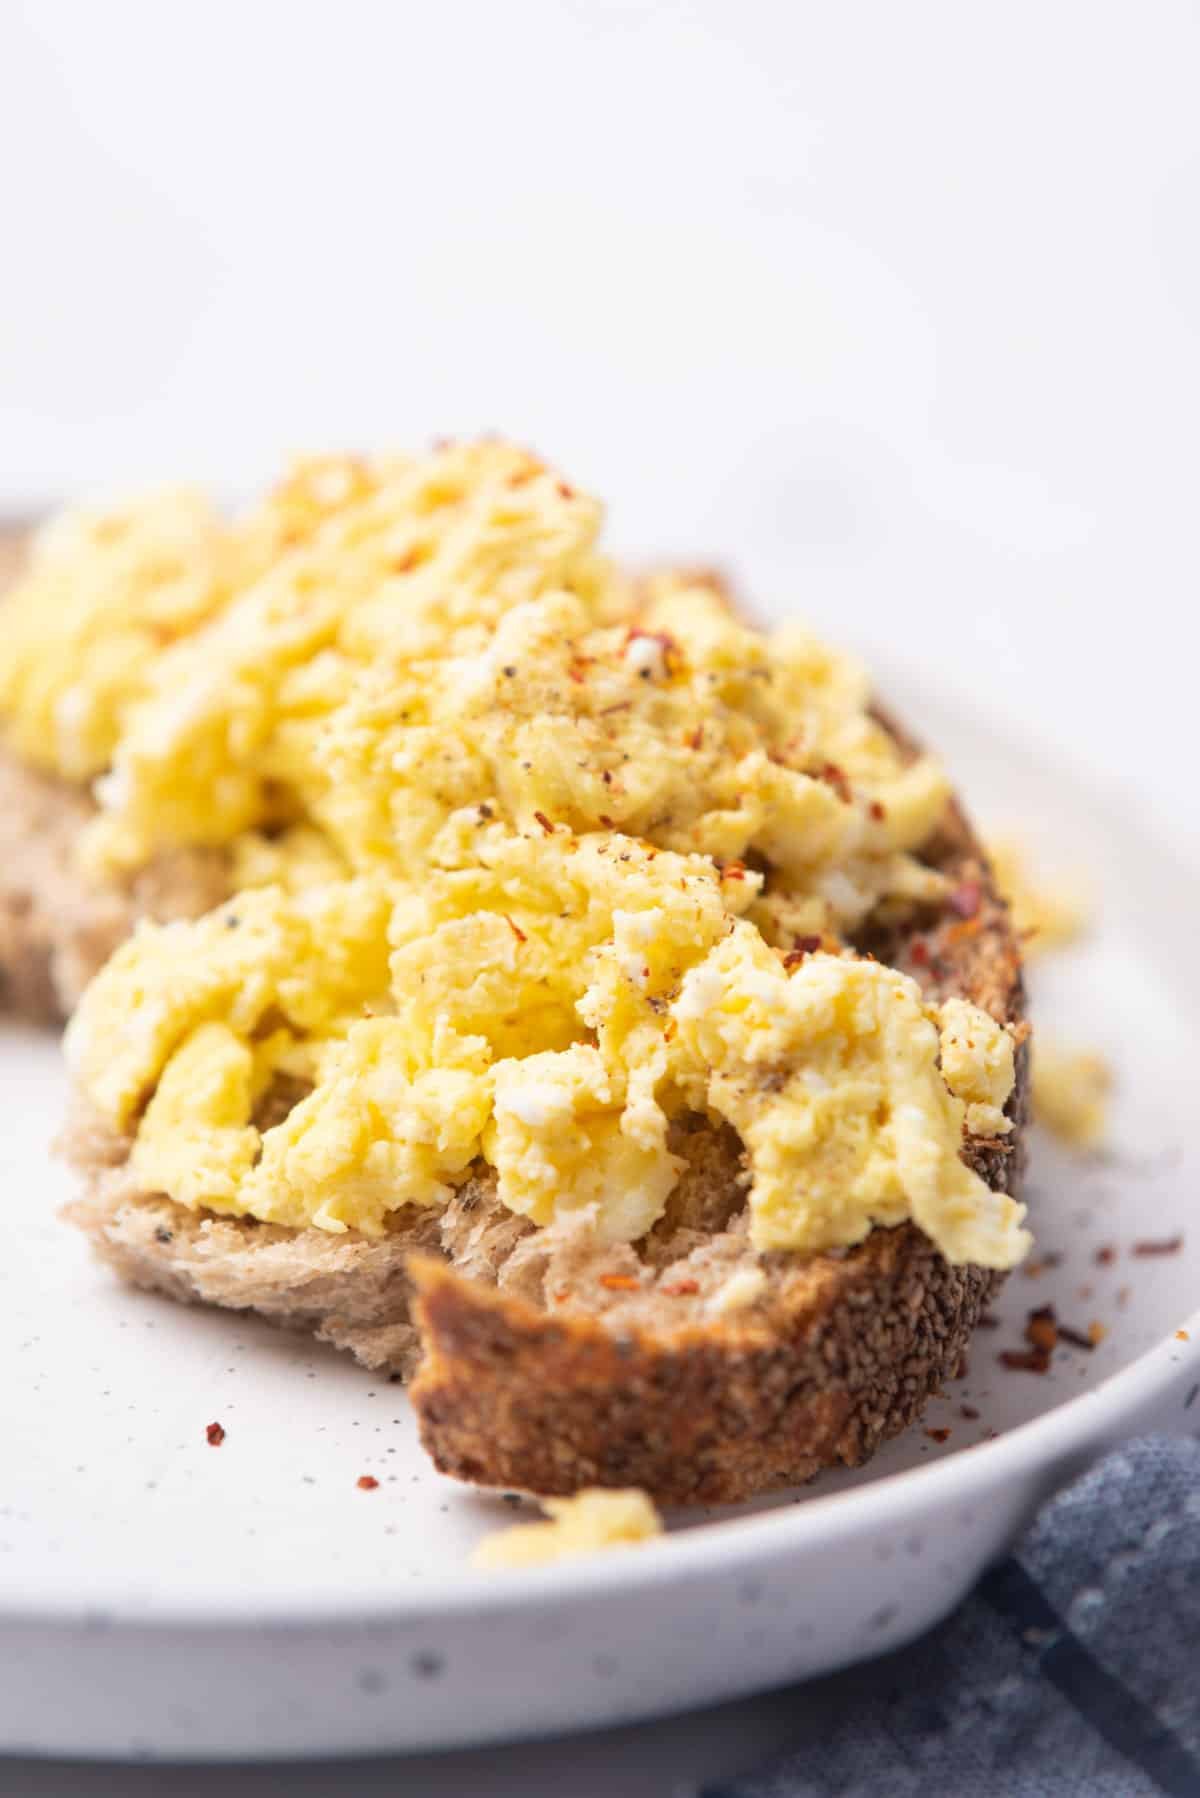 A closeup image of microwave scrambled eggs on a toast served on a plate.